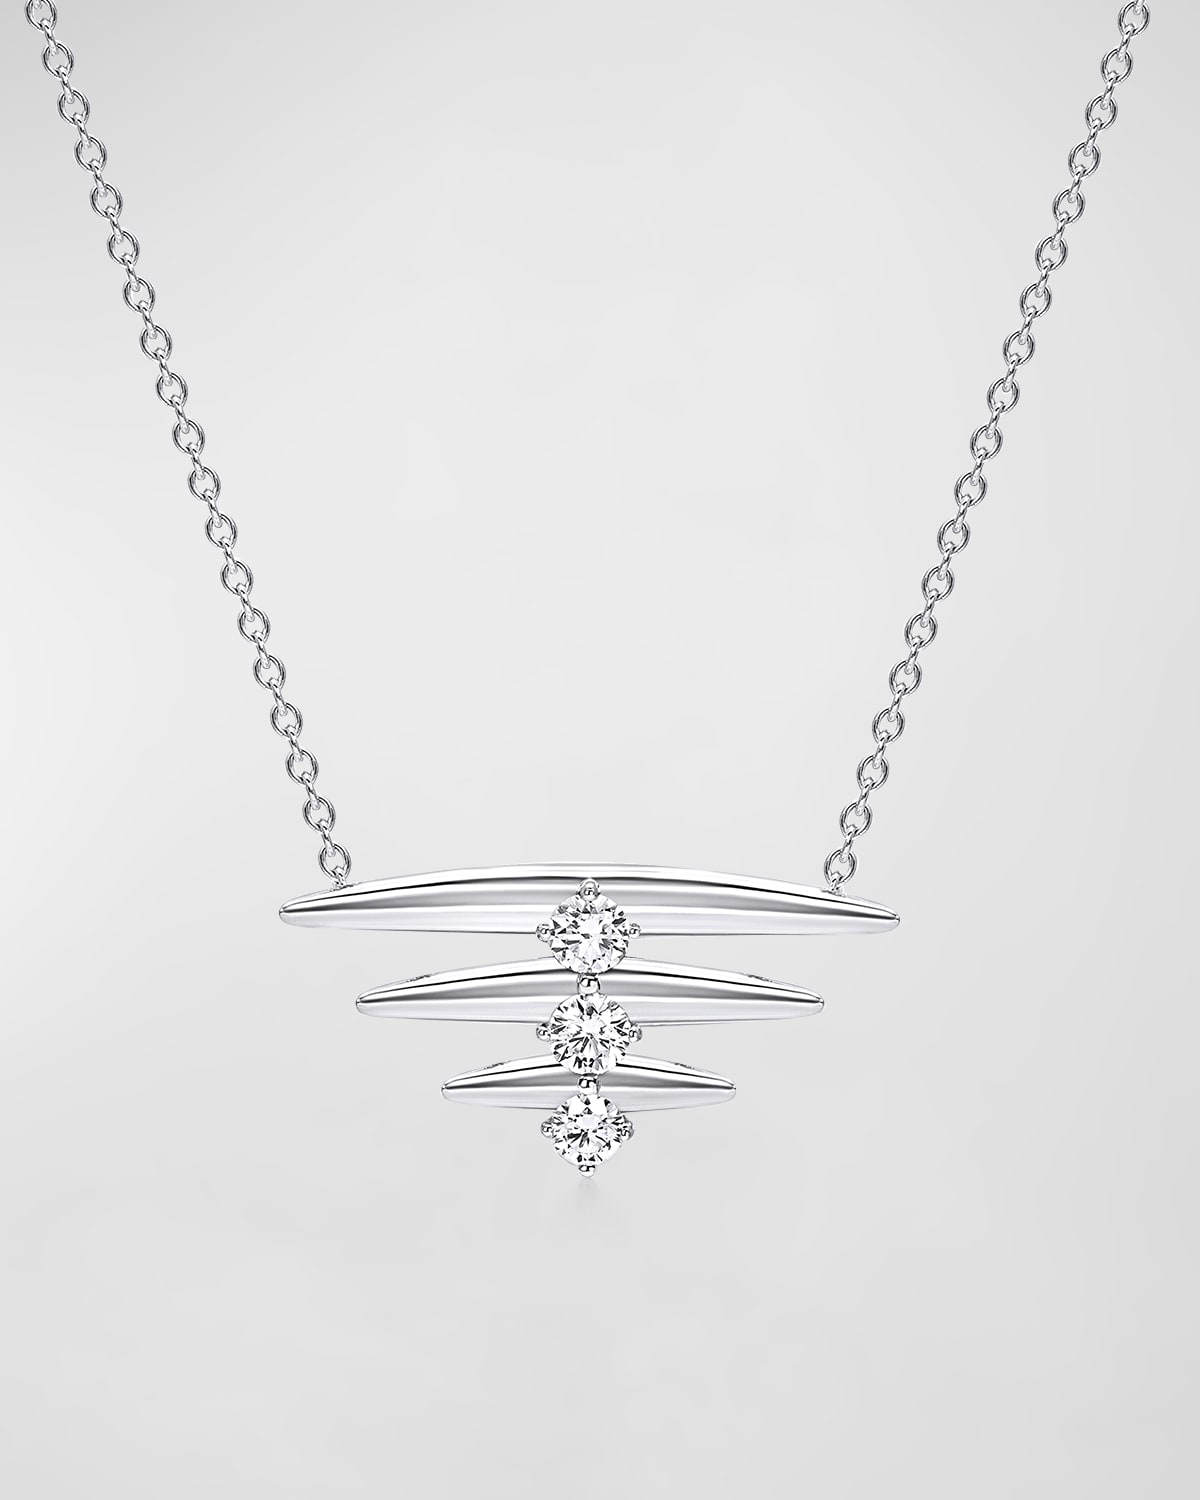 18K Tribal White Gold Necklace with VS-GH Diamonds, 18"